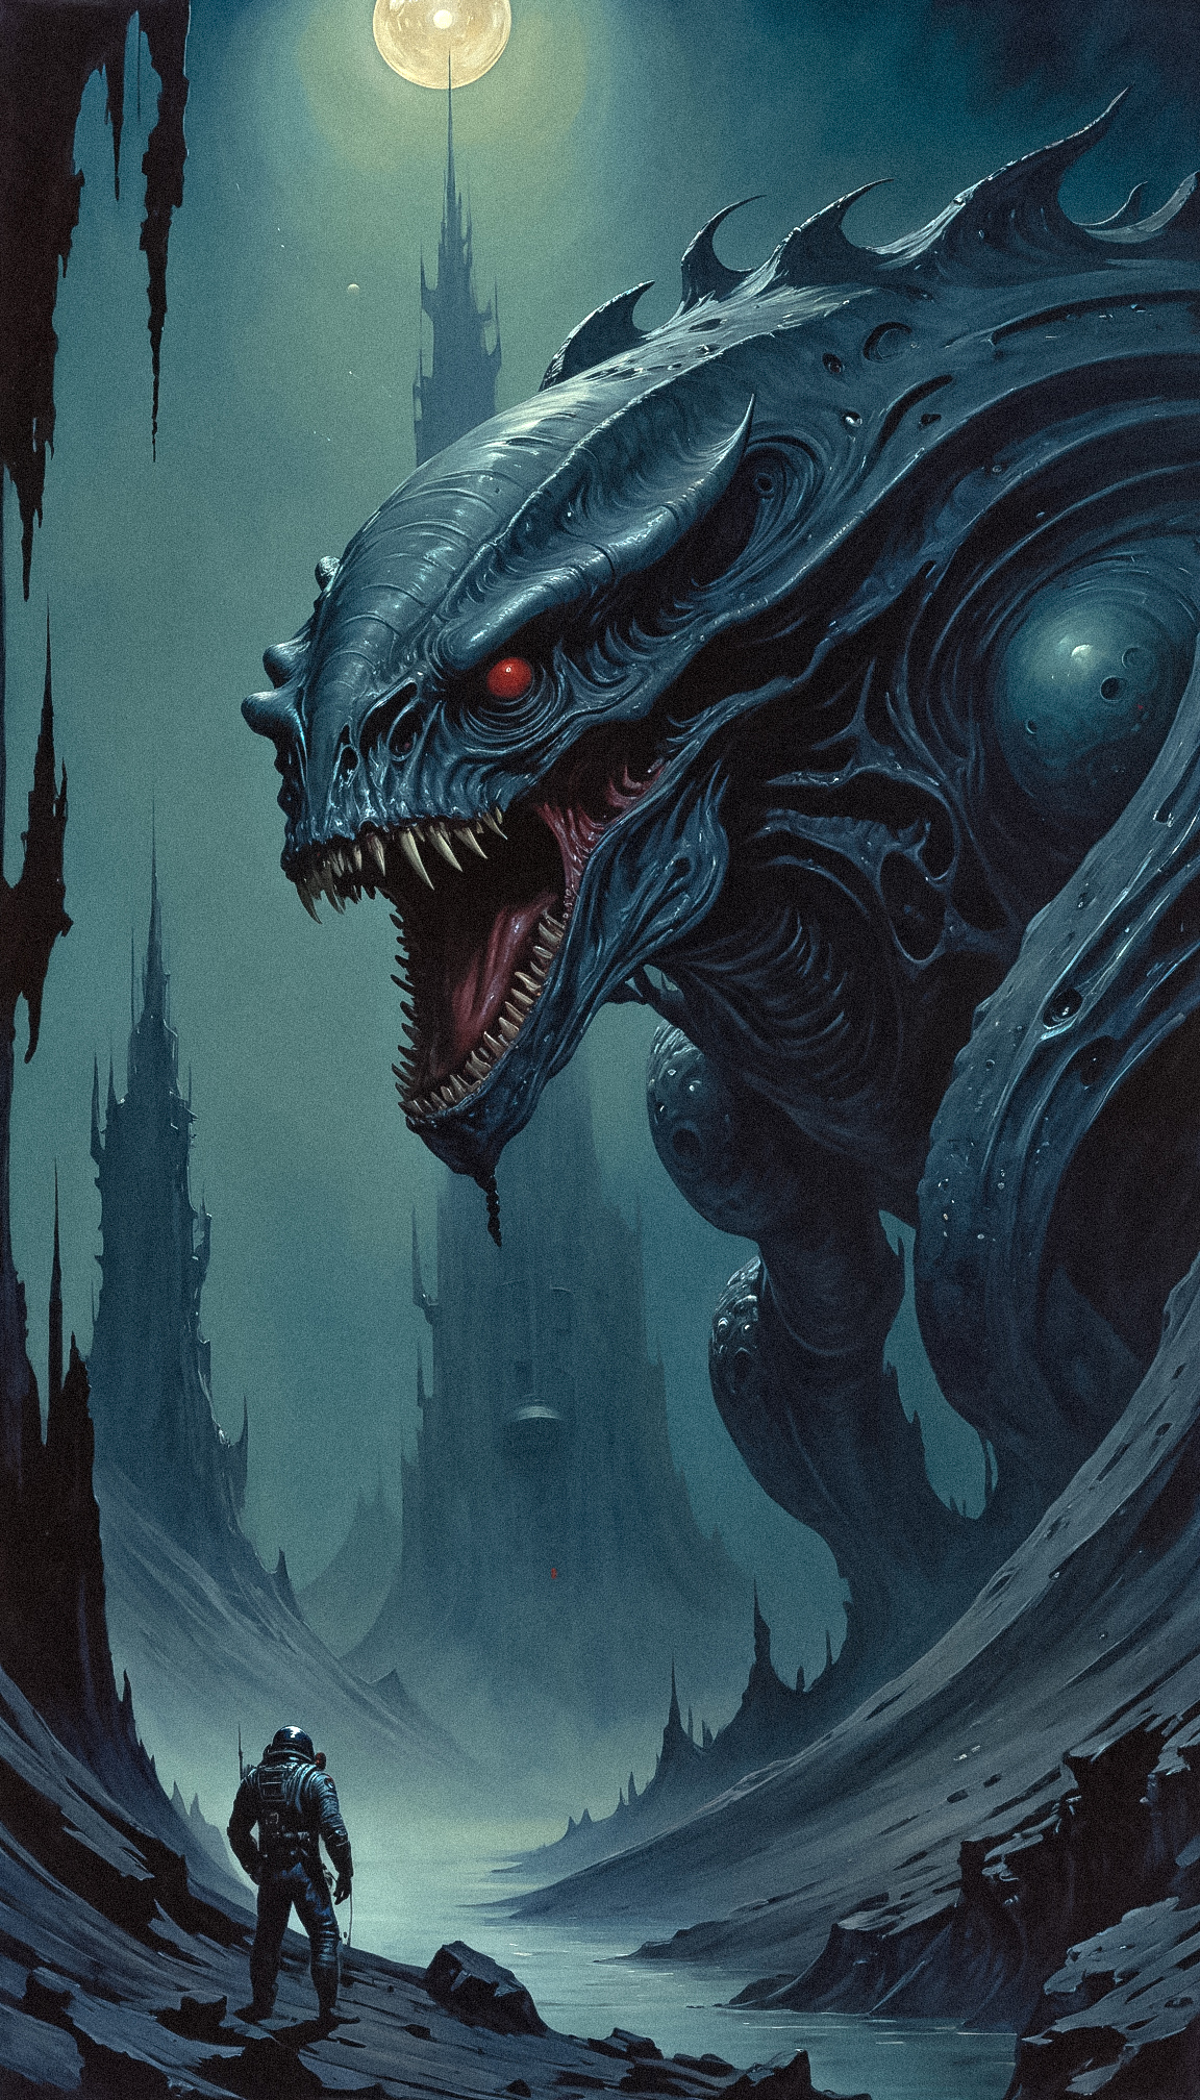 A monster with razor-sharp teeth and red eyes, standing in front of a castle and towers.